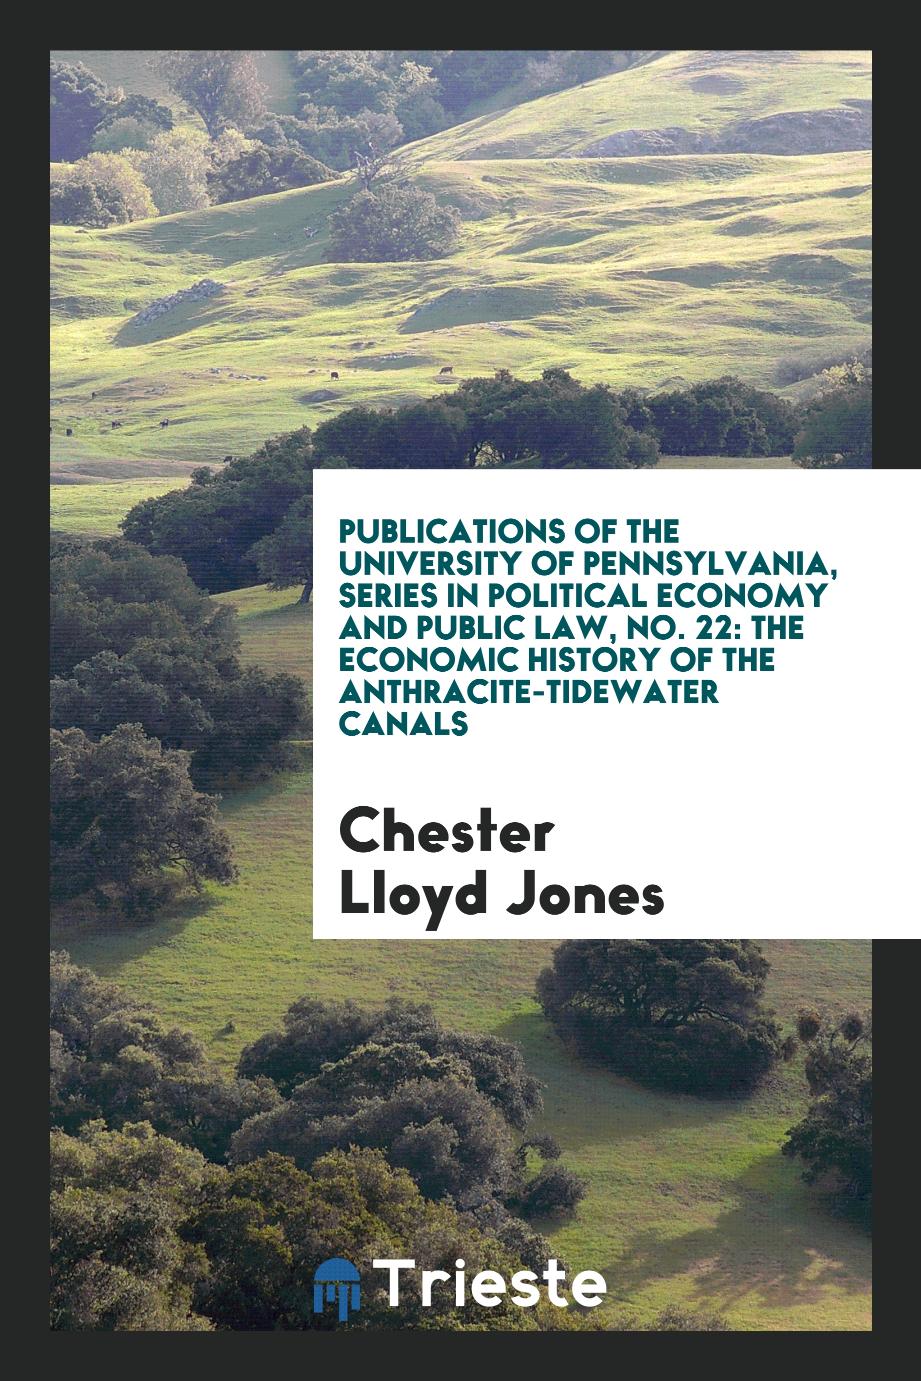 Publications of the University of Pennsylvania, series in political economy and public law, No. 22: The economic history of the anthracite-tidewater canals